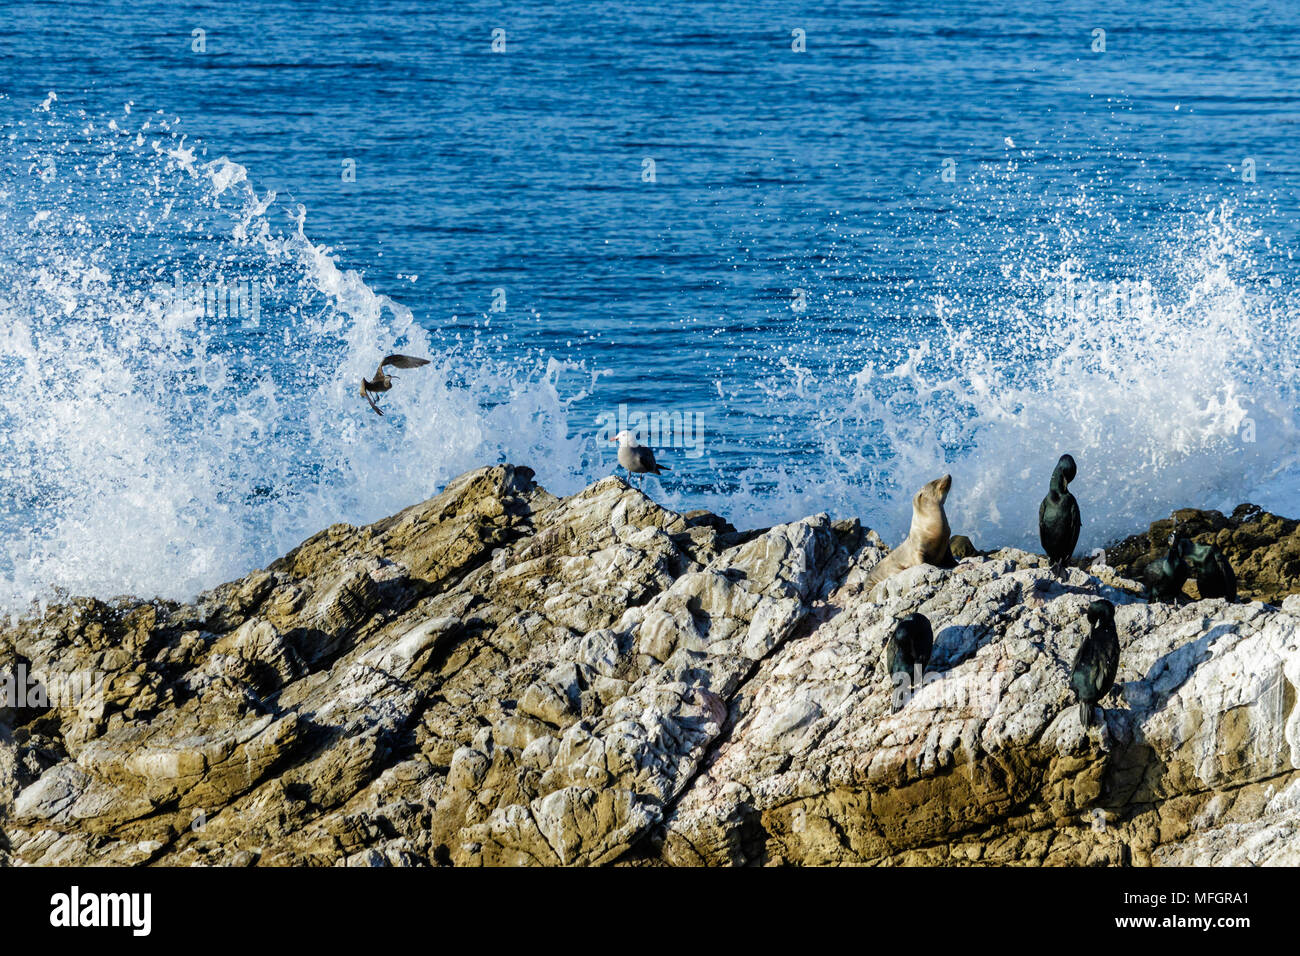 Leo Carrillo State Park near Malibu, California. Variety of marine animals sitting on rock; Pacific ocean and breaking wave in the background. Stock Photo